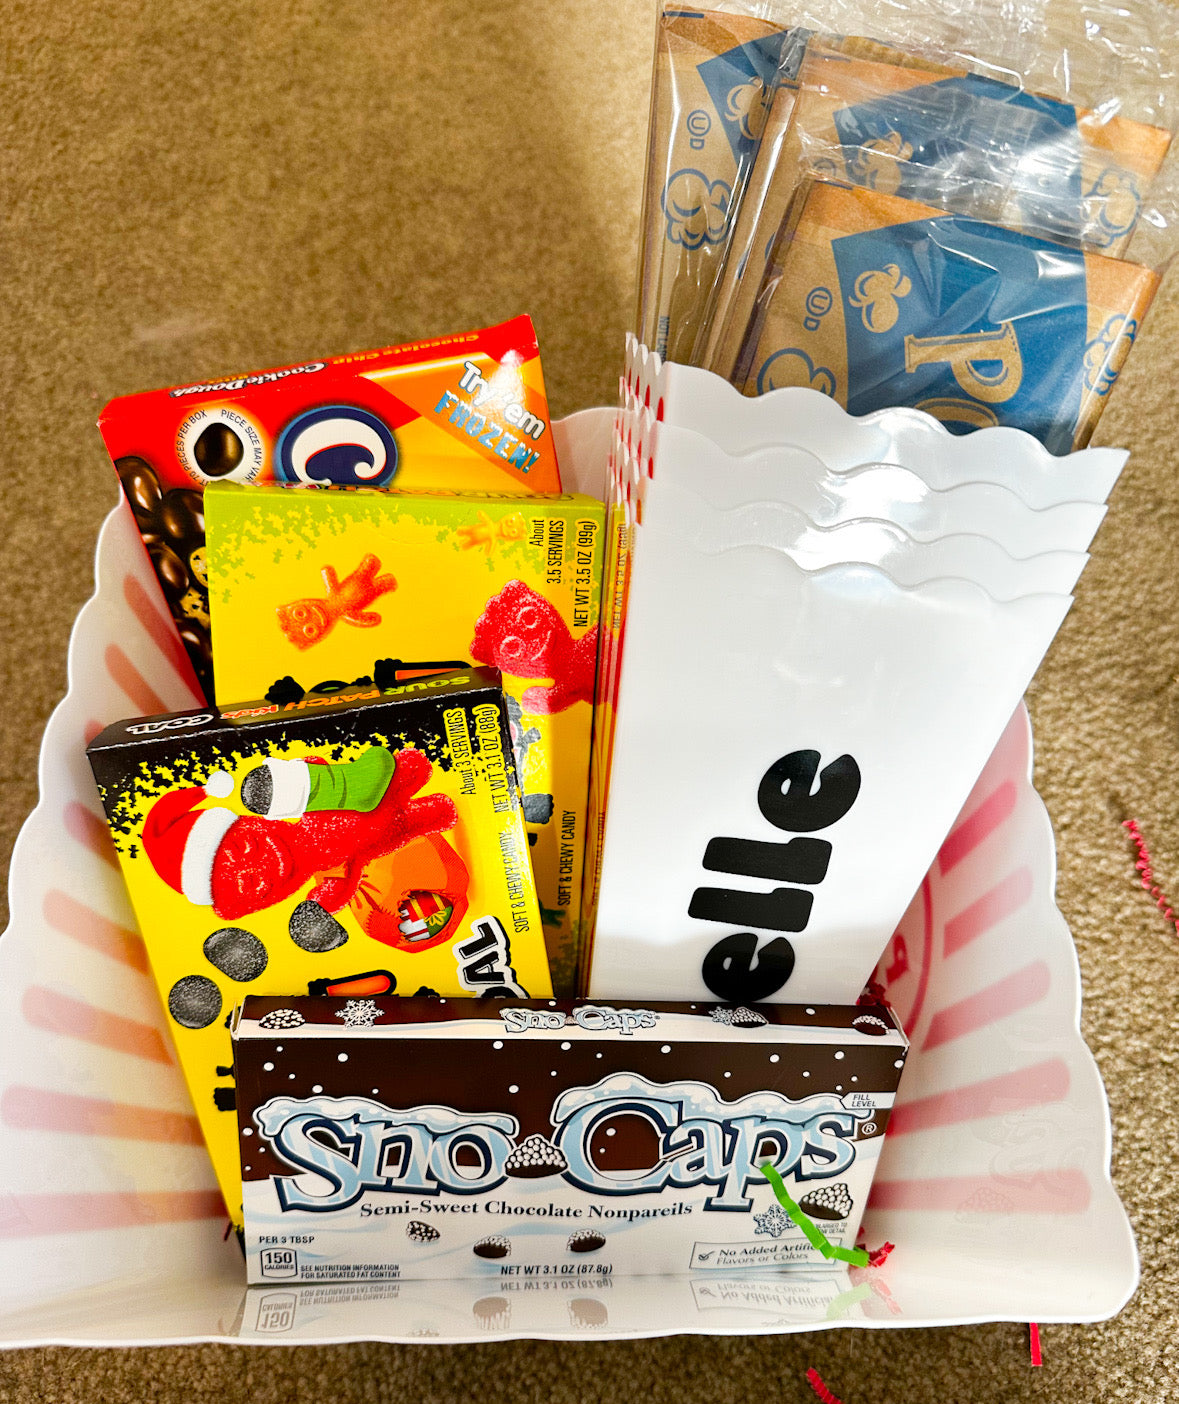 Personalized Family Movie Night Package